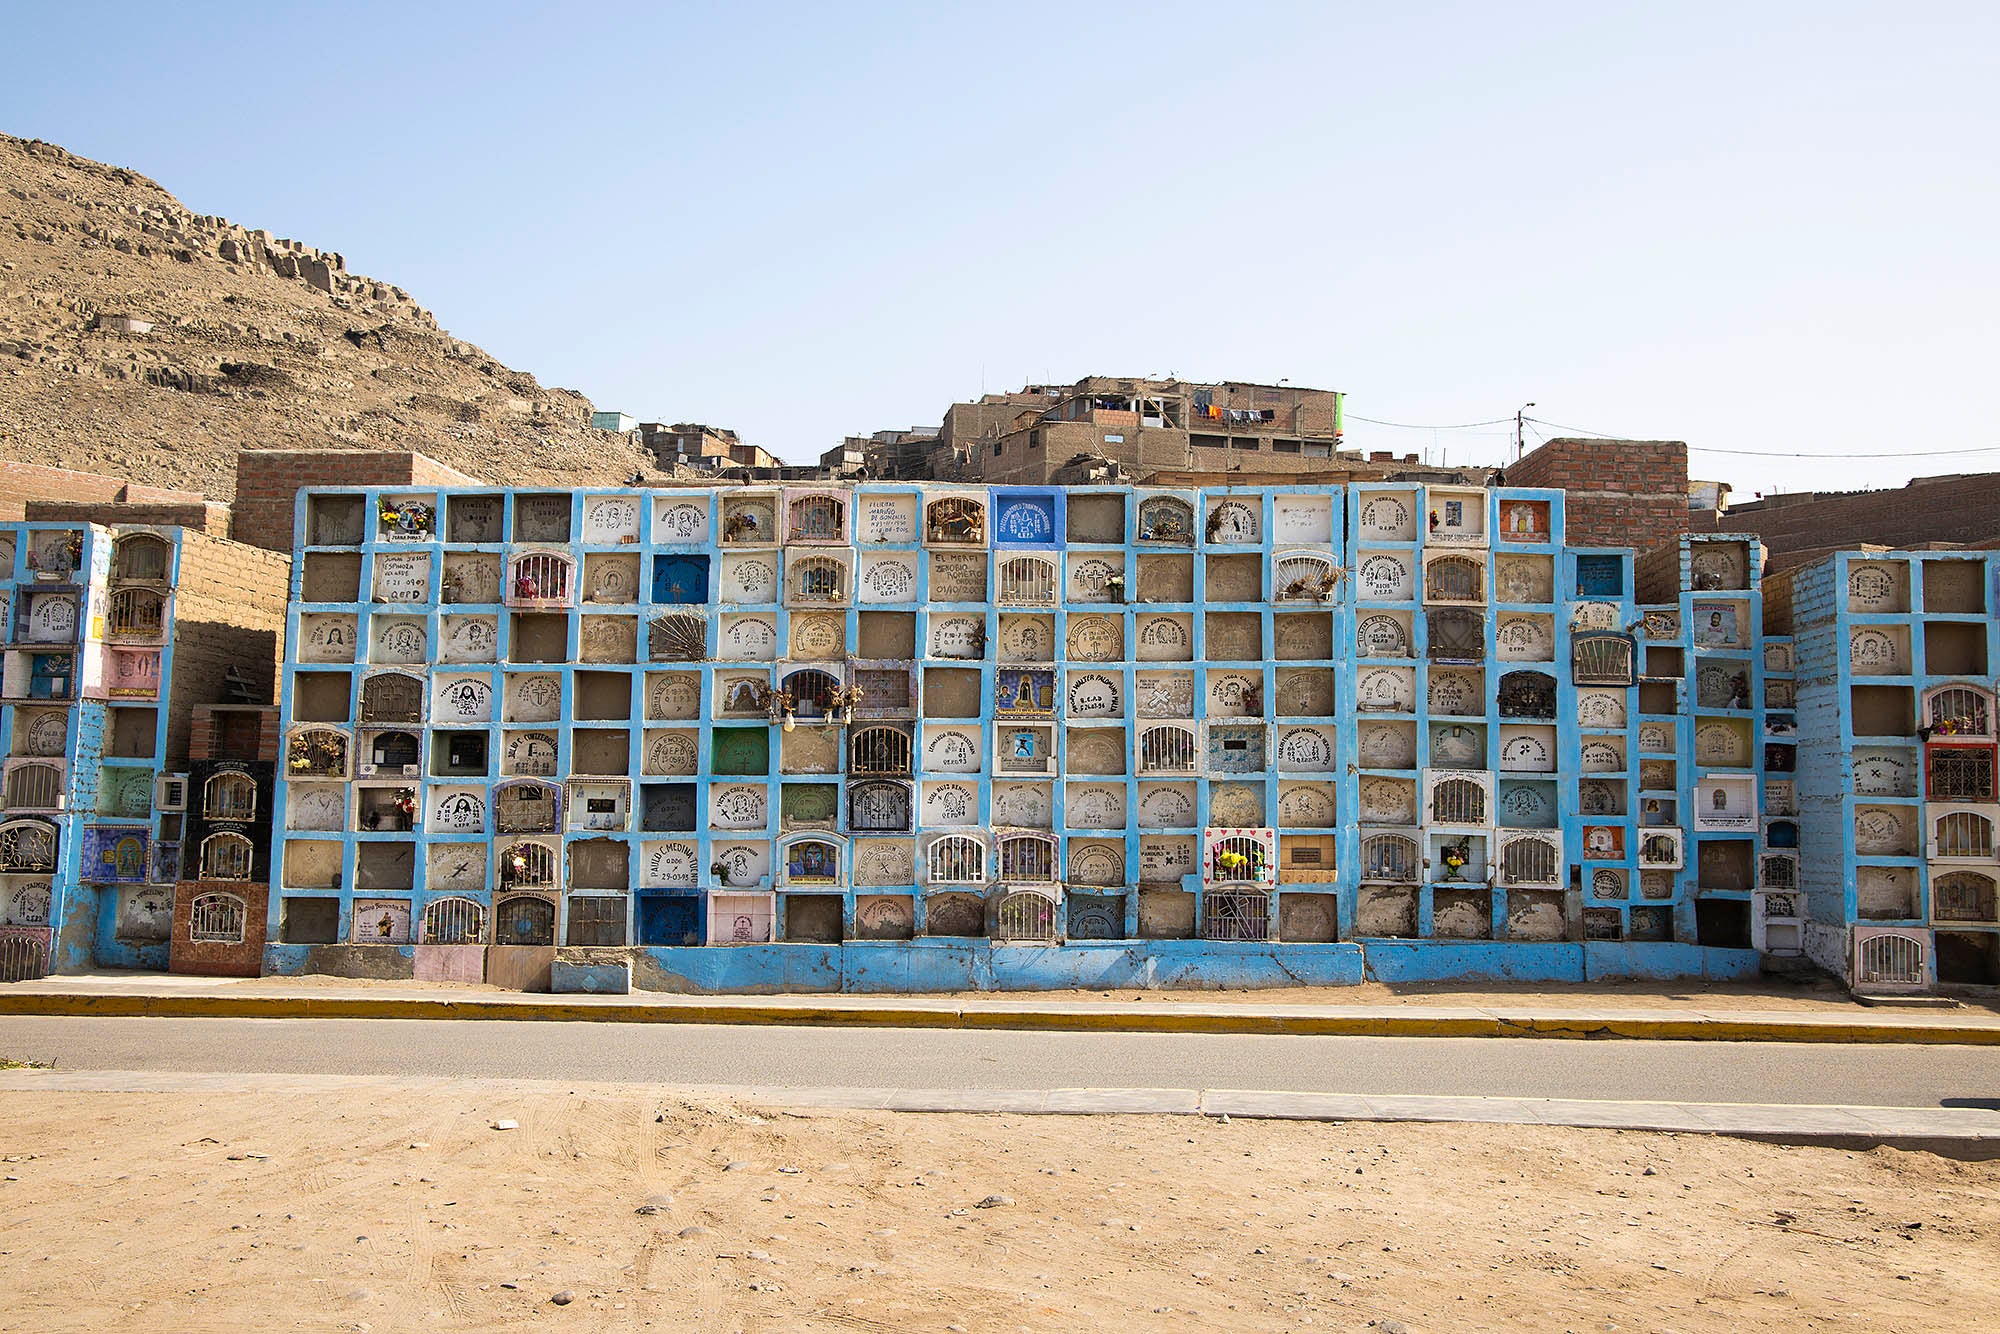 Photograph of stone lockers photographed in peru in front of slums travel inspiration misericordia lima latin america